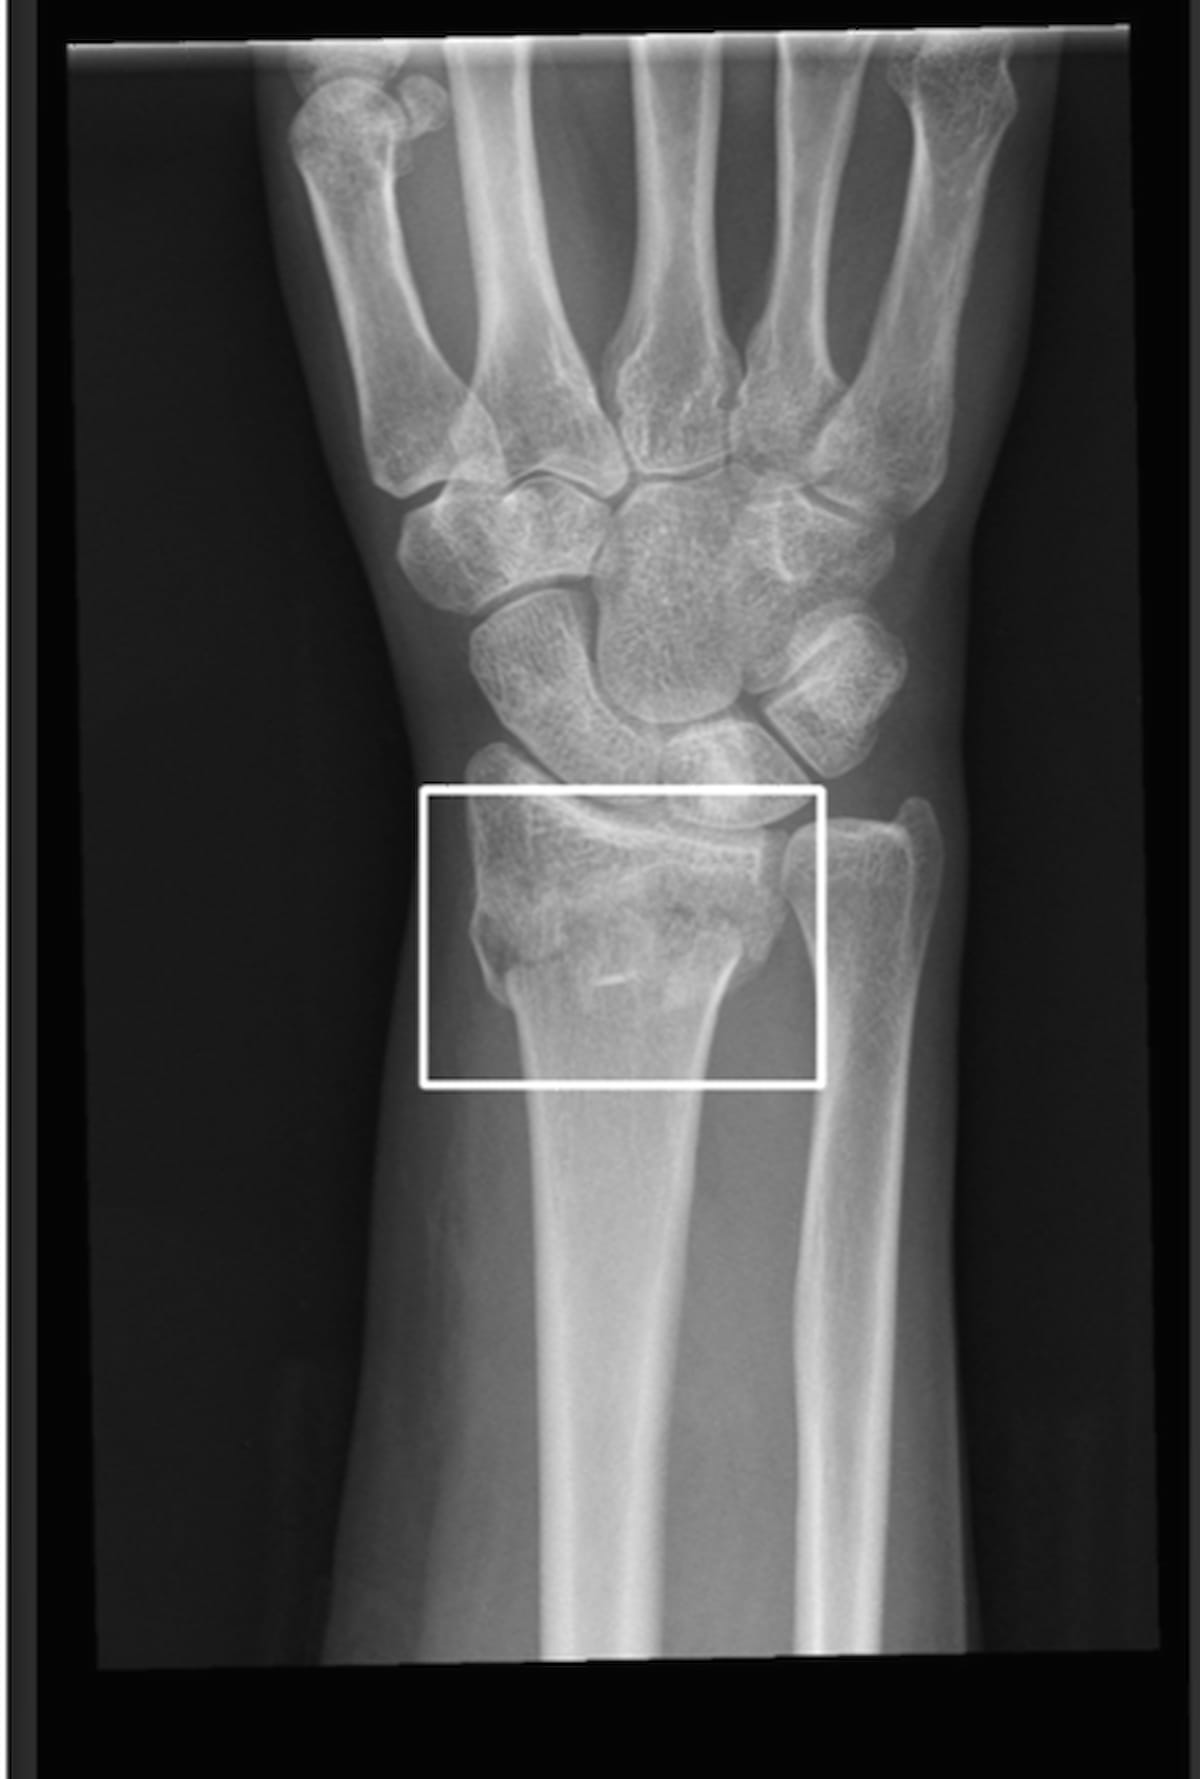 AI Facilitates Nearly 83 Percent Improvement in Turnaround Time for Fracture X-Rays